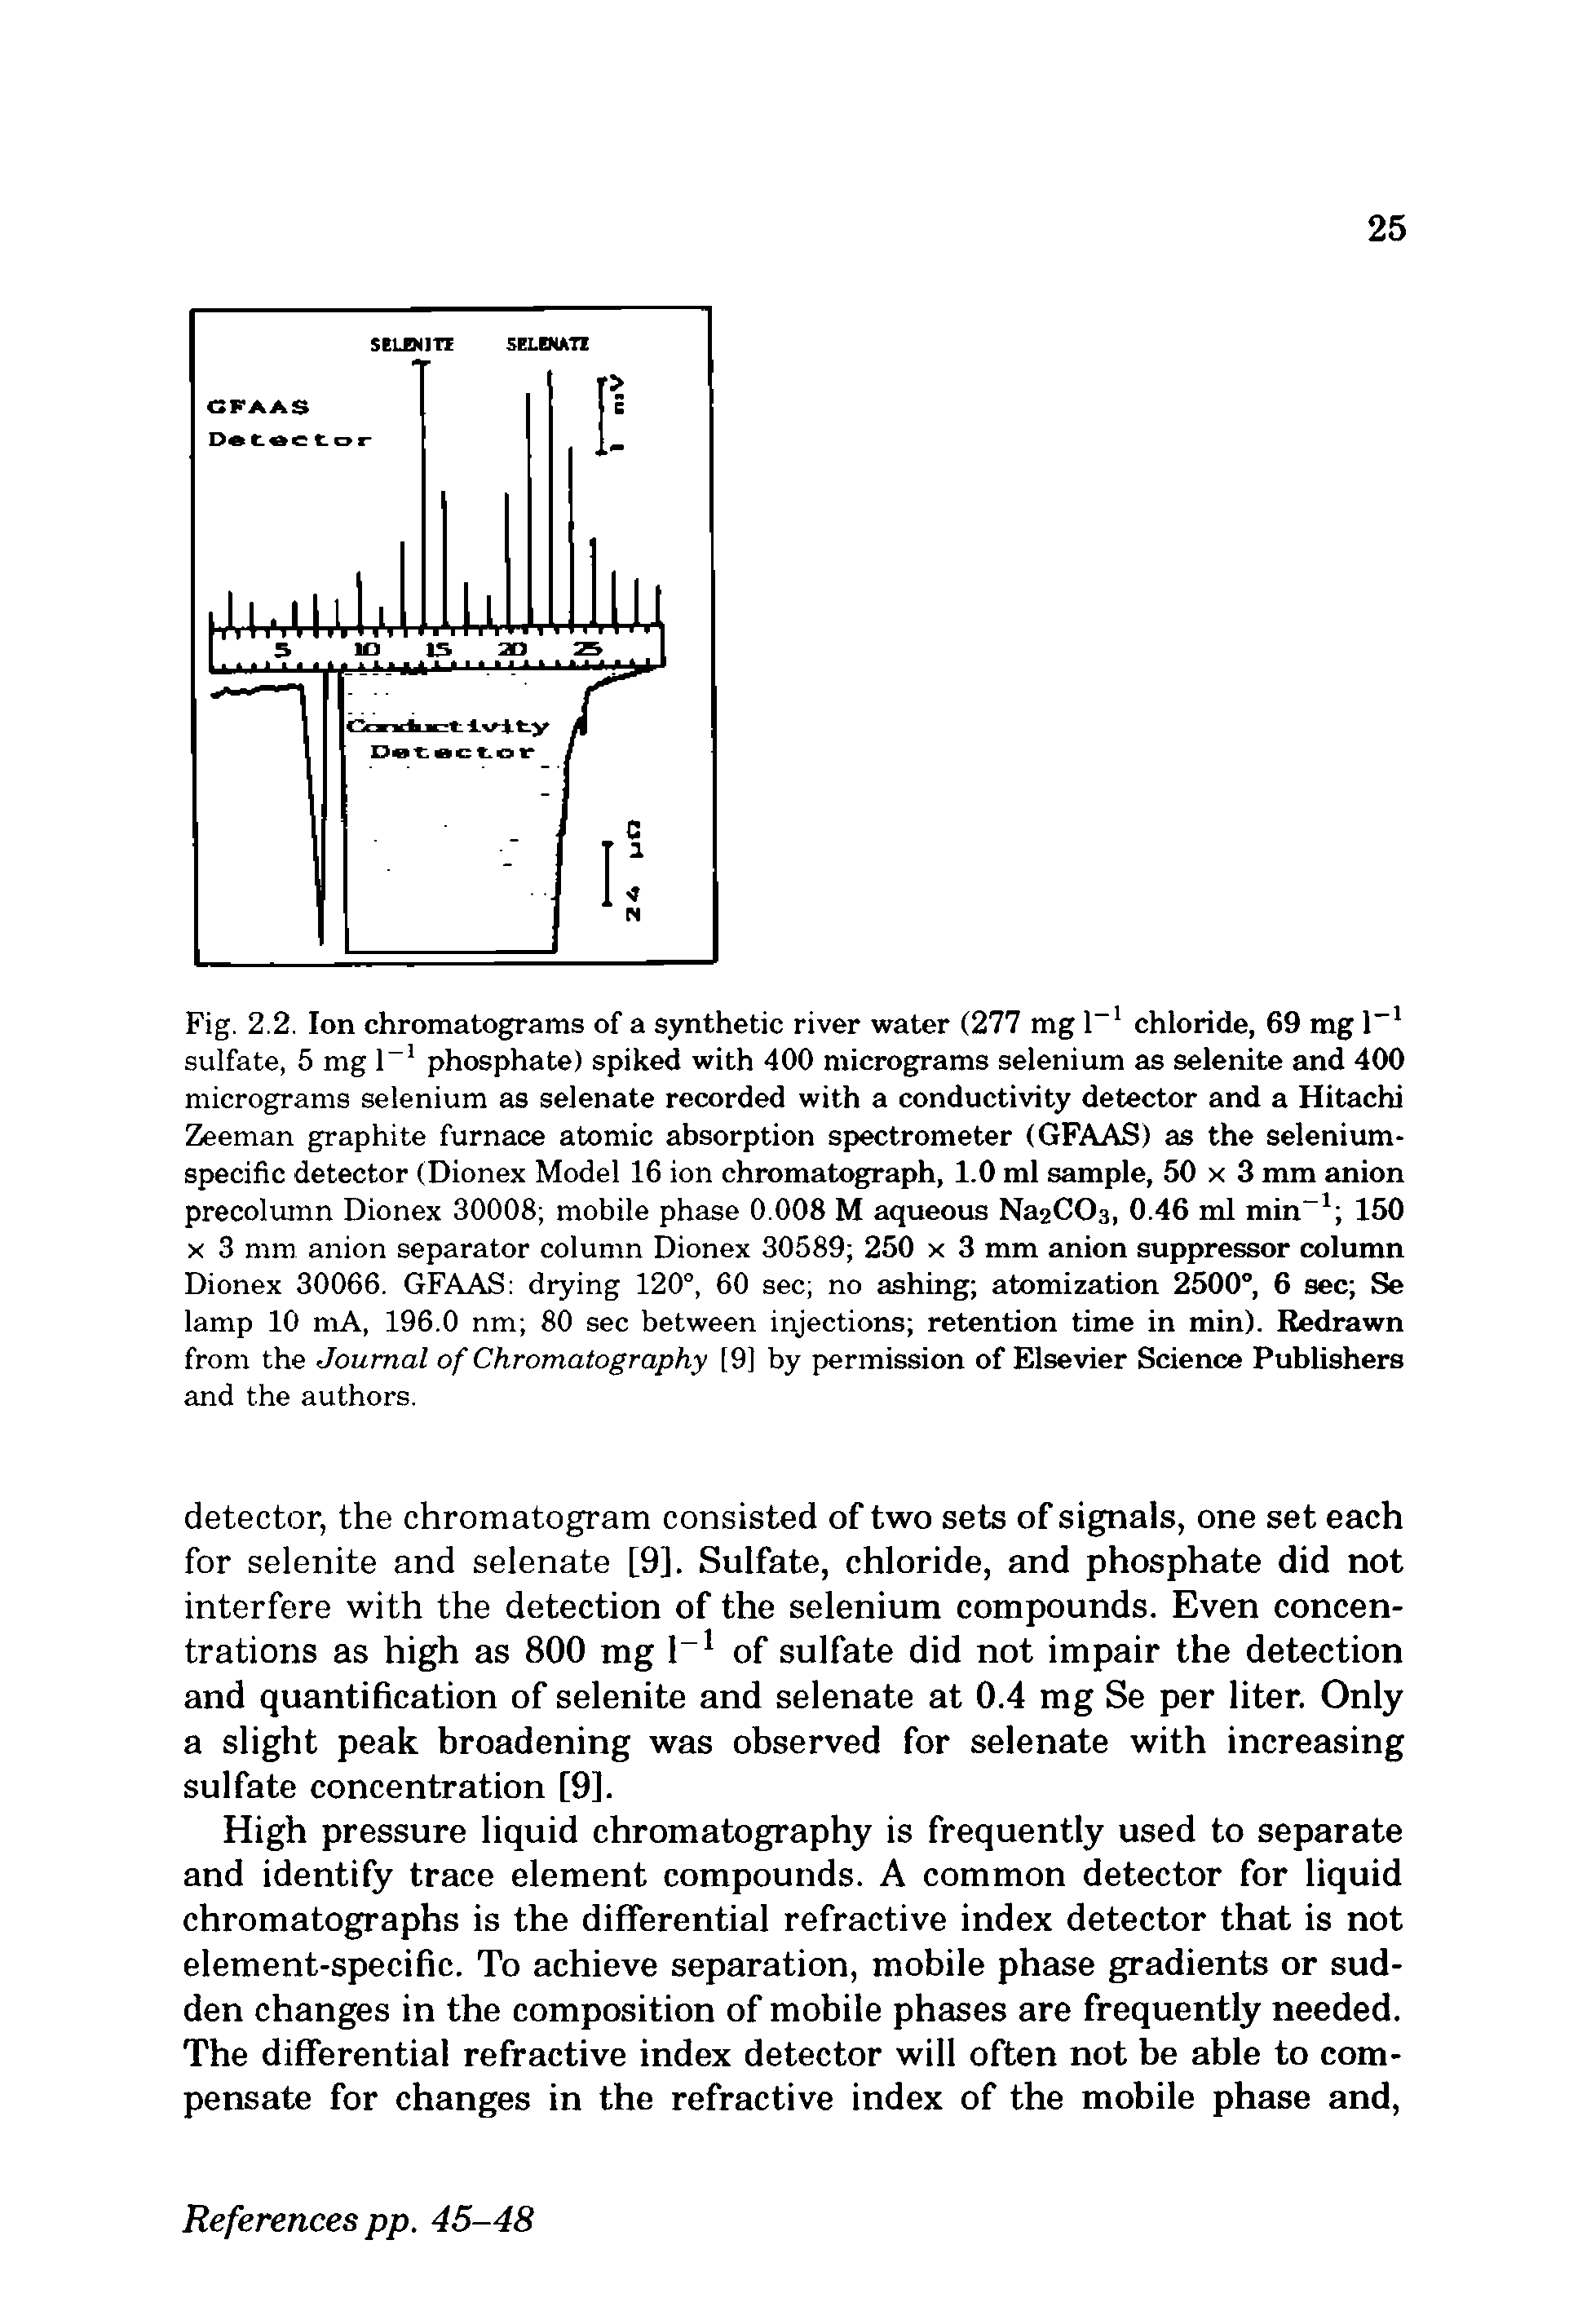 Fig. 2.2. Ion chromatograms of a synthetic river water (277 mg chloride, 69 mg sulfate, 5 mg 1 phosphate) spiked with 400 micrograms selenium as selenite and 400 micrograms selenium as selenate recorded with a conductivity detector and a Hitachi Zeeman graphite furnace atomic absorption spectrometer (GFAAS) as the selenium-specific detector (Dionex Model 16 ion chromatograph, 1.0 ml sample, 50 x 3 mm anion precolumn Dionex 30008 mobile phase 0.008 M aqueous Na2C03, 0.46 ml min 150 X 3 mm anion separator column Dionex 30589 250 x 3 mm anion suppressor column Dionex 30066. GFAAS drying 120°, 60 sec no ashing atomization 2500°, 6 sec Se lamp 10 niA, 196.0 nm 80 sec between injections retention time in min). Redrawn from the Journal of Chromatography [9] by permission of Elsevier Science Publishers and the authors.